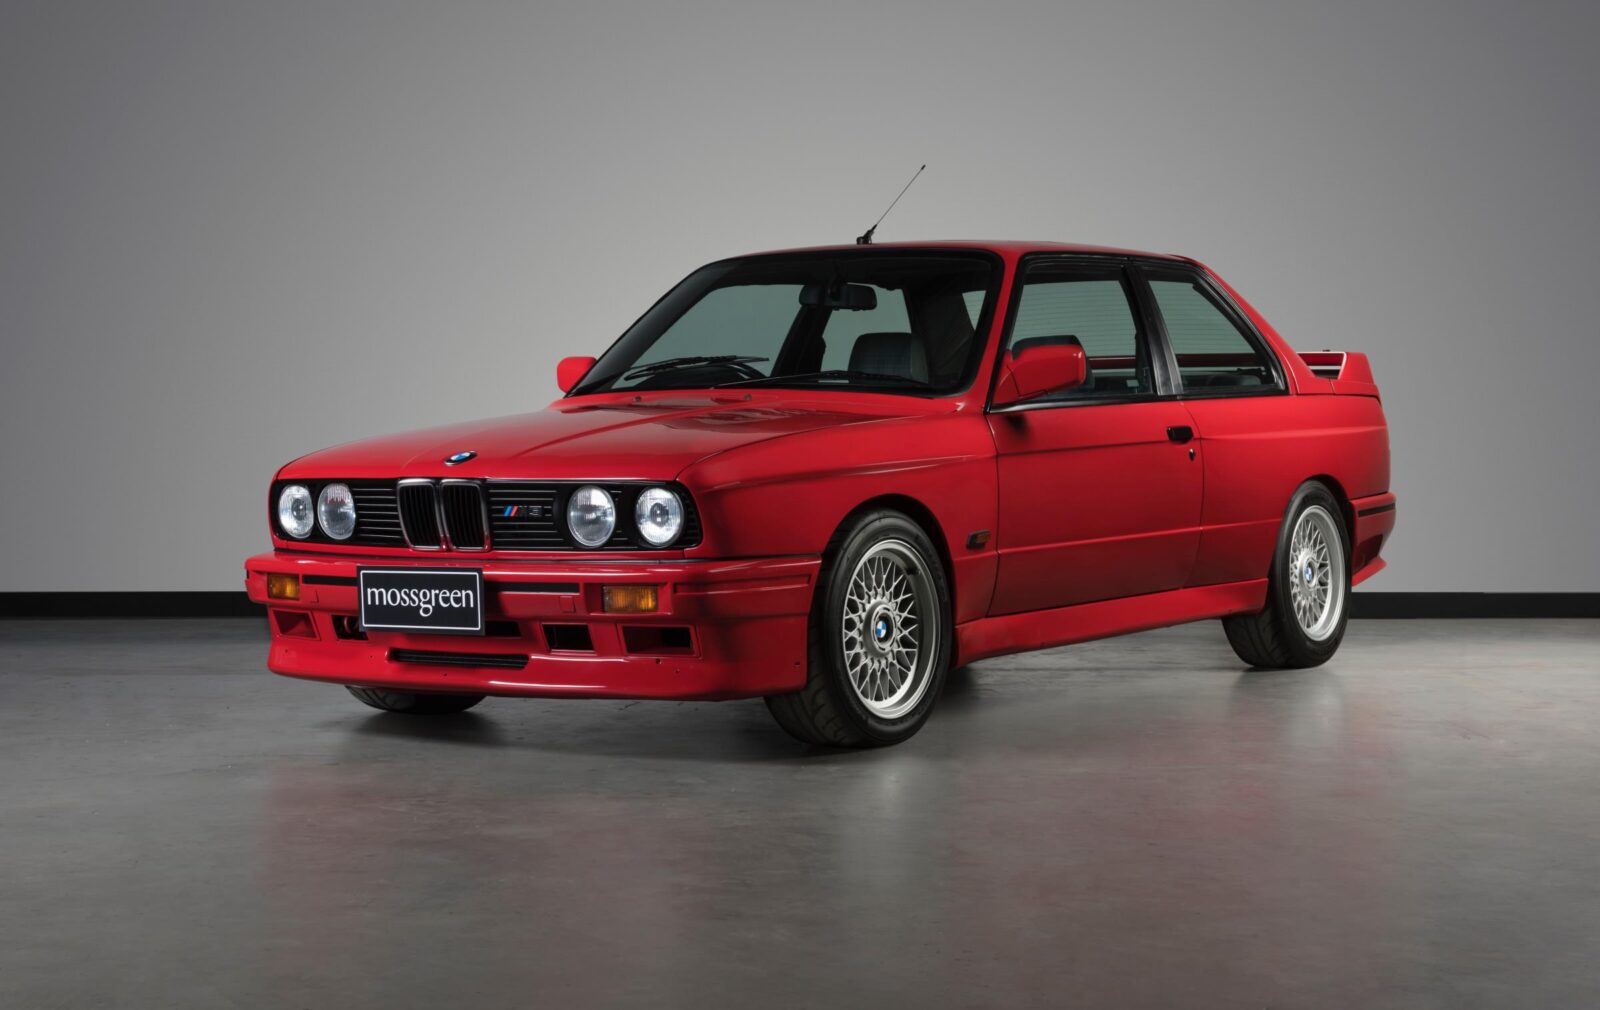 10 Reasons The BMW E30 Was Such An Awesome Car